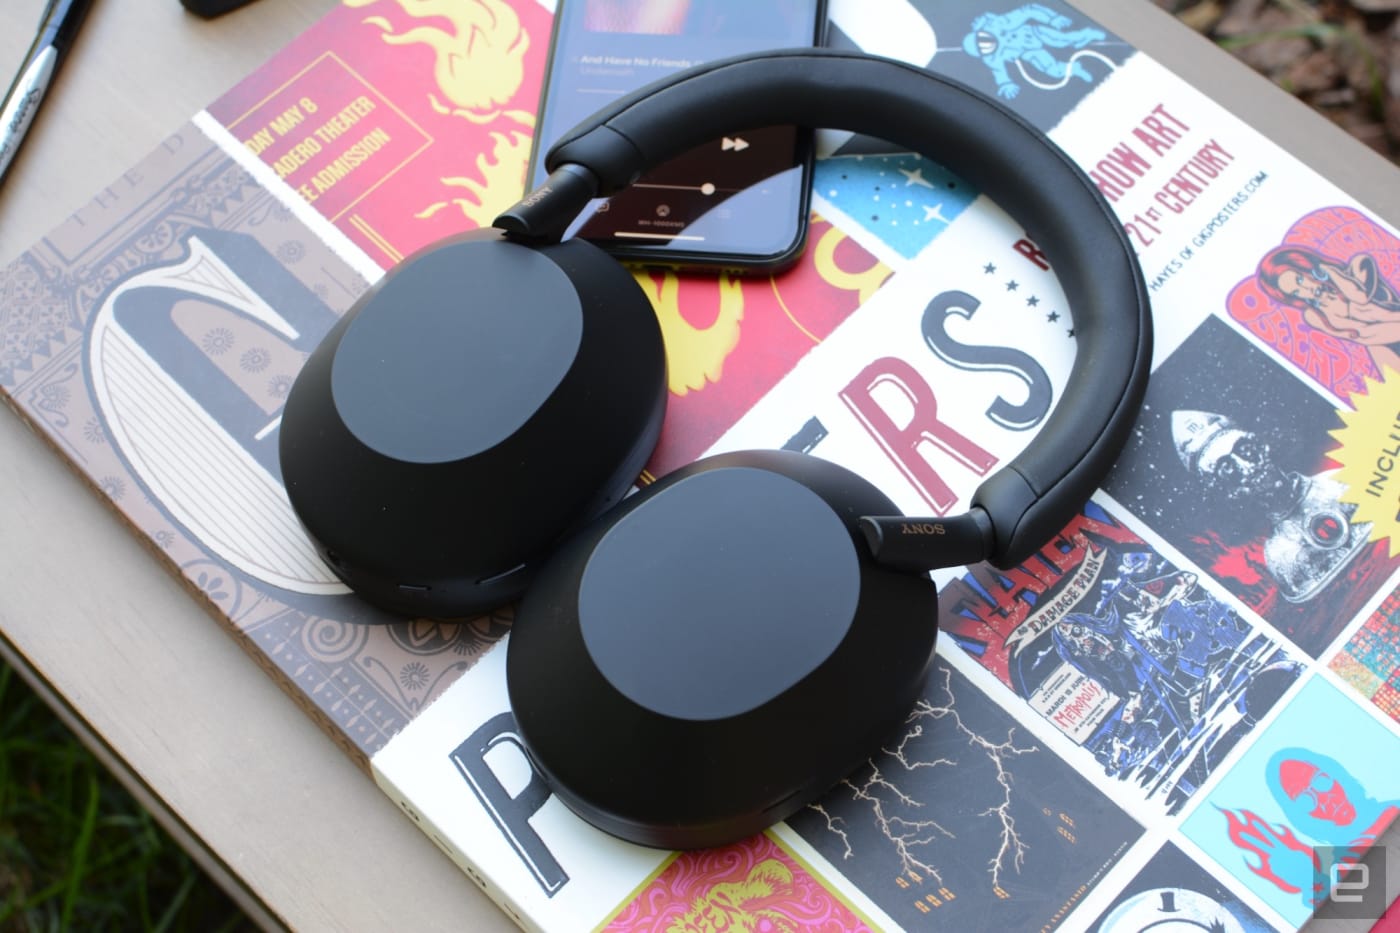 Sony's WH-1000XM5 ANC headphones are just $280 right now